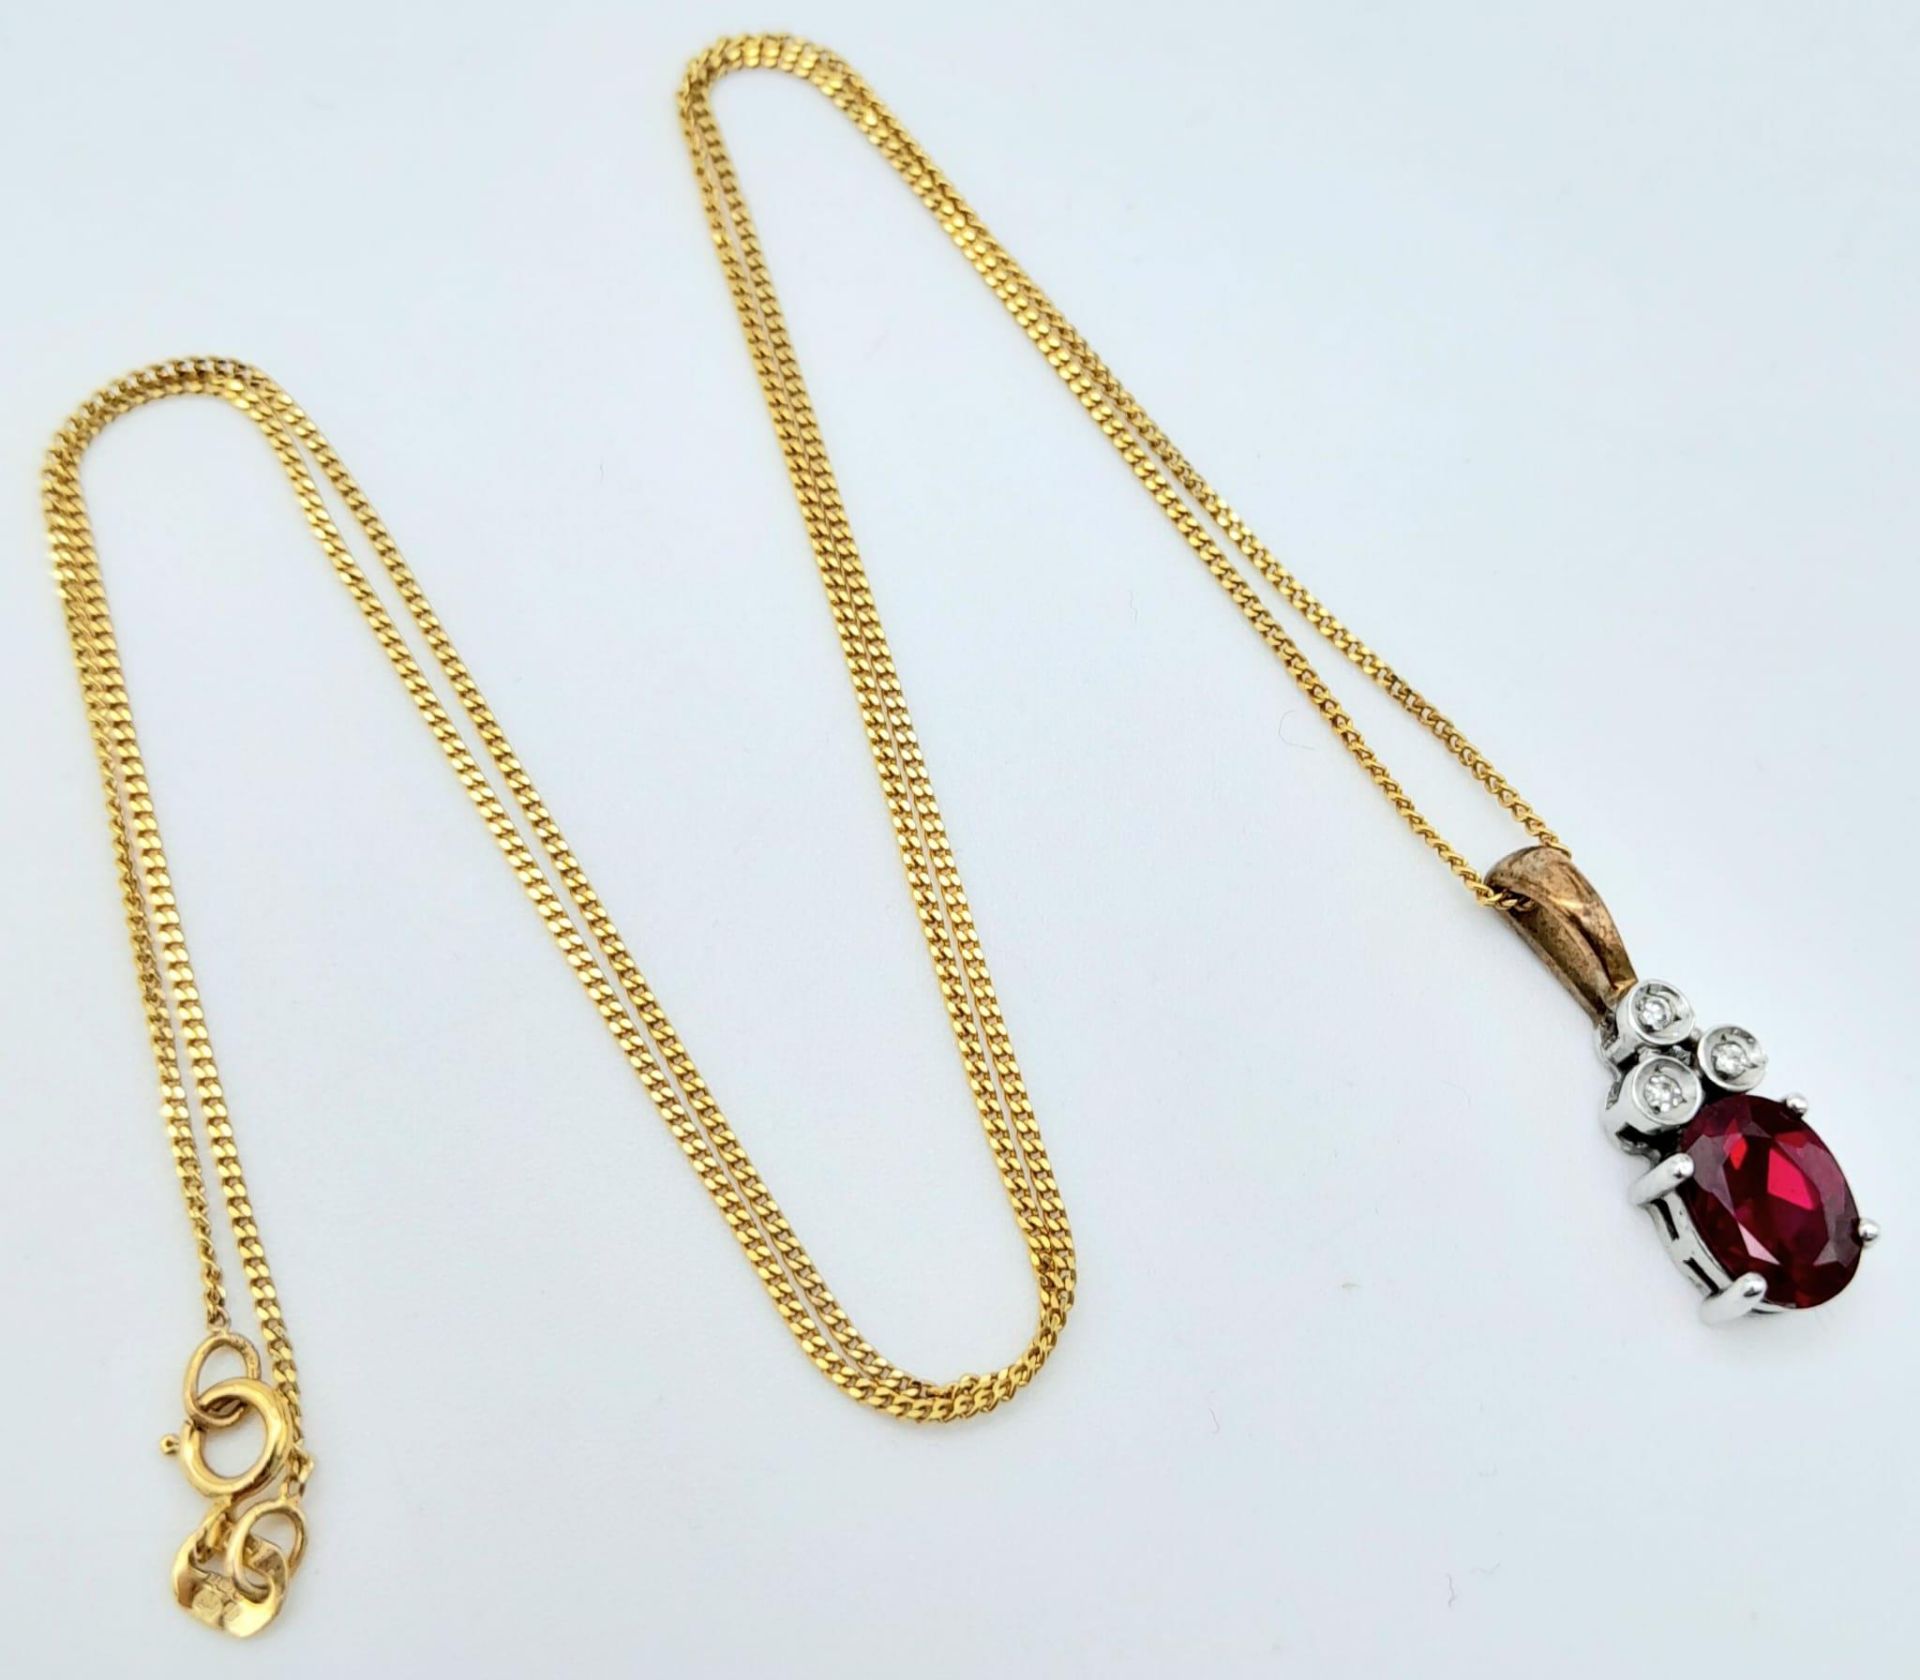 A 9K YELLOW GOLD DIAMOND & RED STONE PENDANT BELIEVED TO BE RUBY & 9K GOLD CHAIN 2.8G , 46cm length. - Image 3 of 6